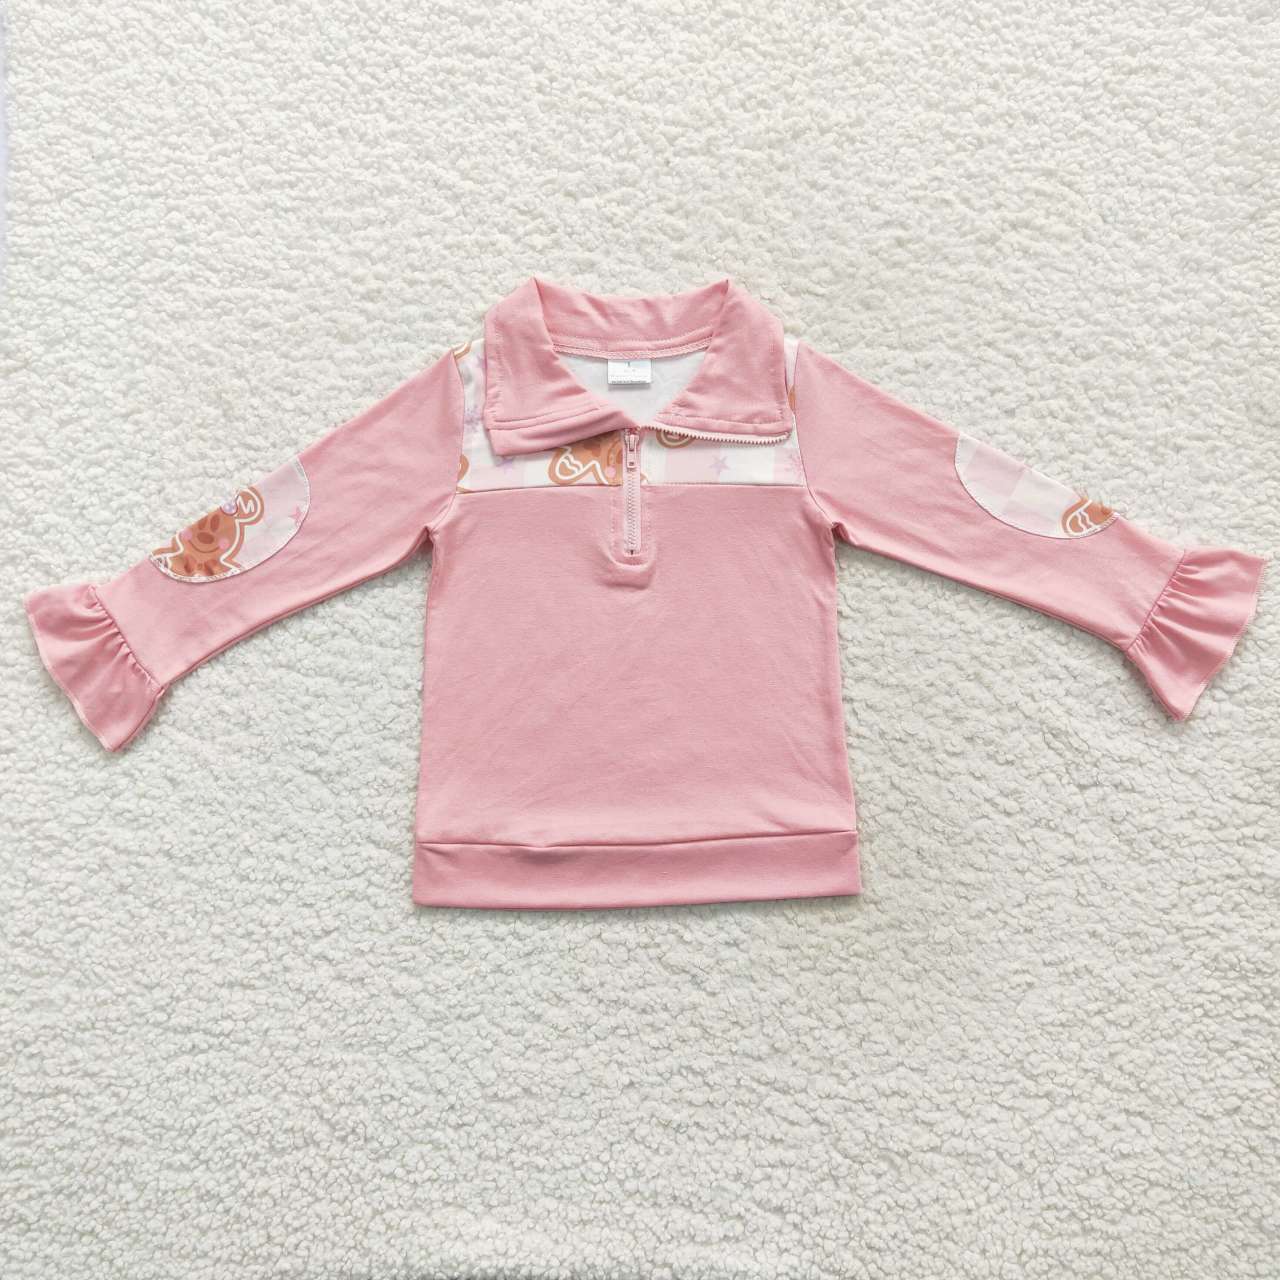 GT0218 Cartoon pink and white zip-up long-sleeved top